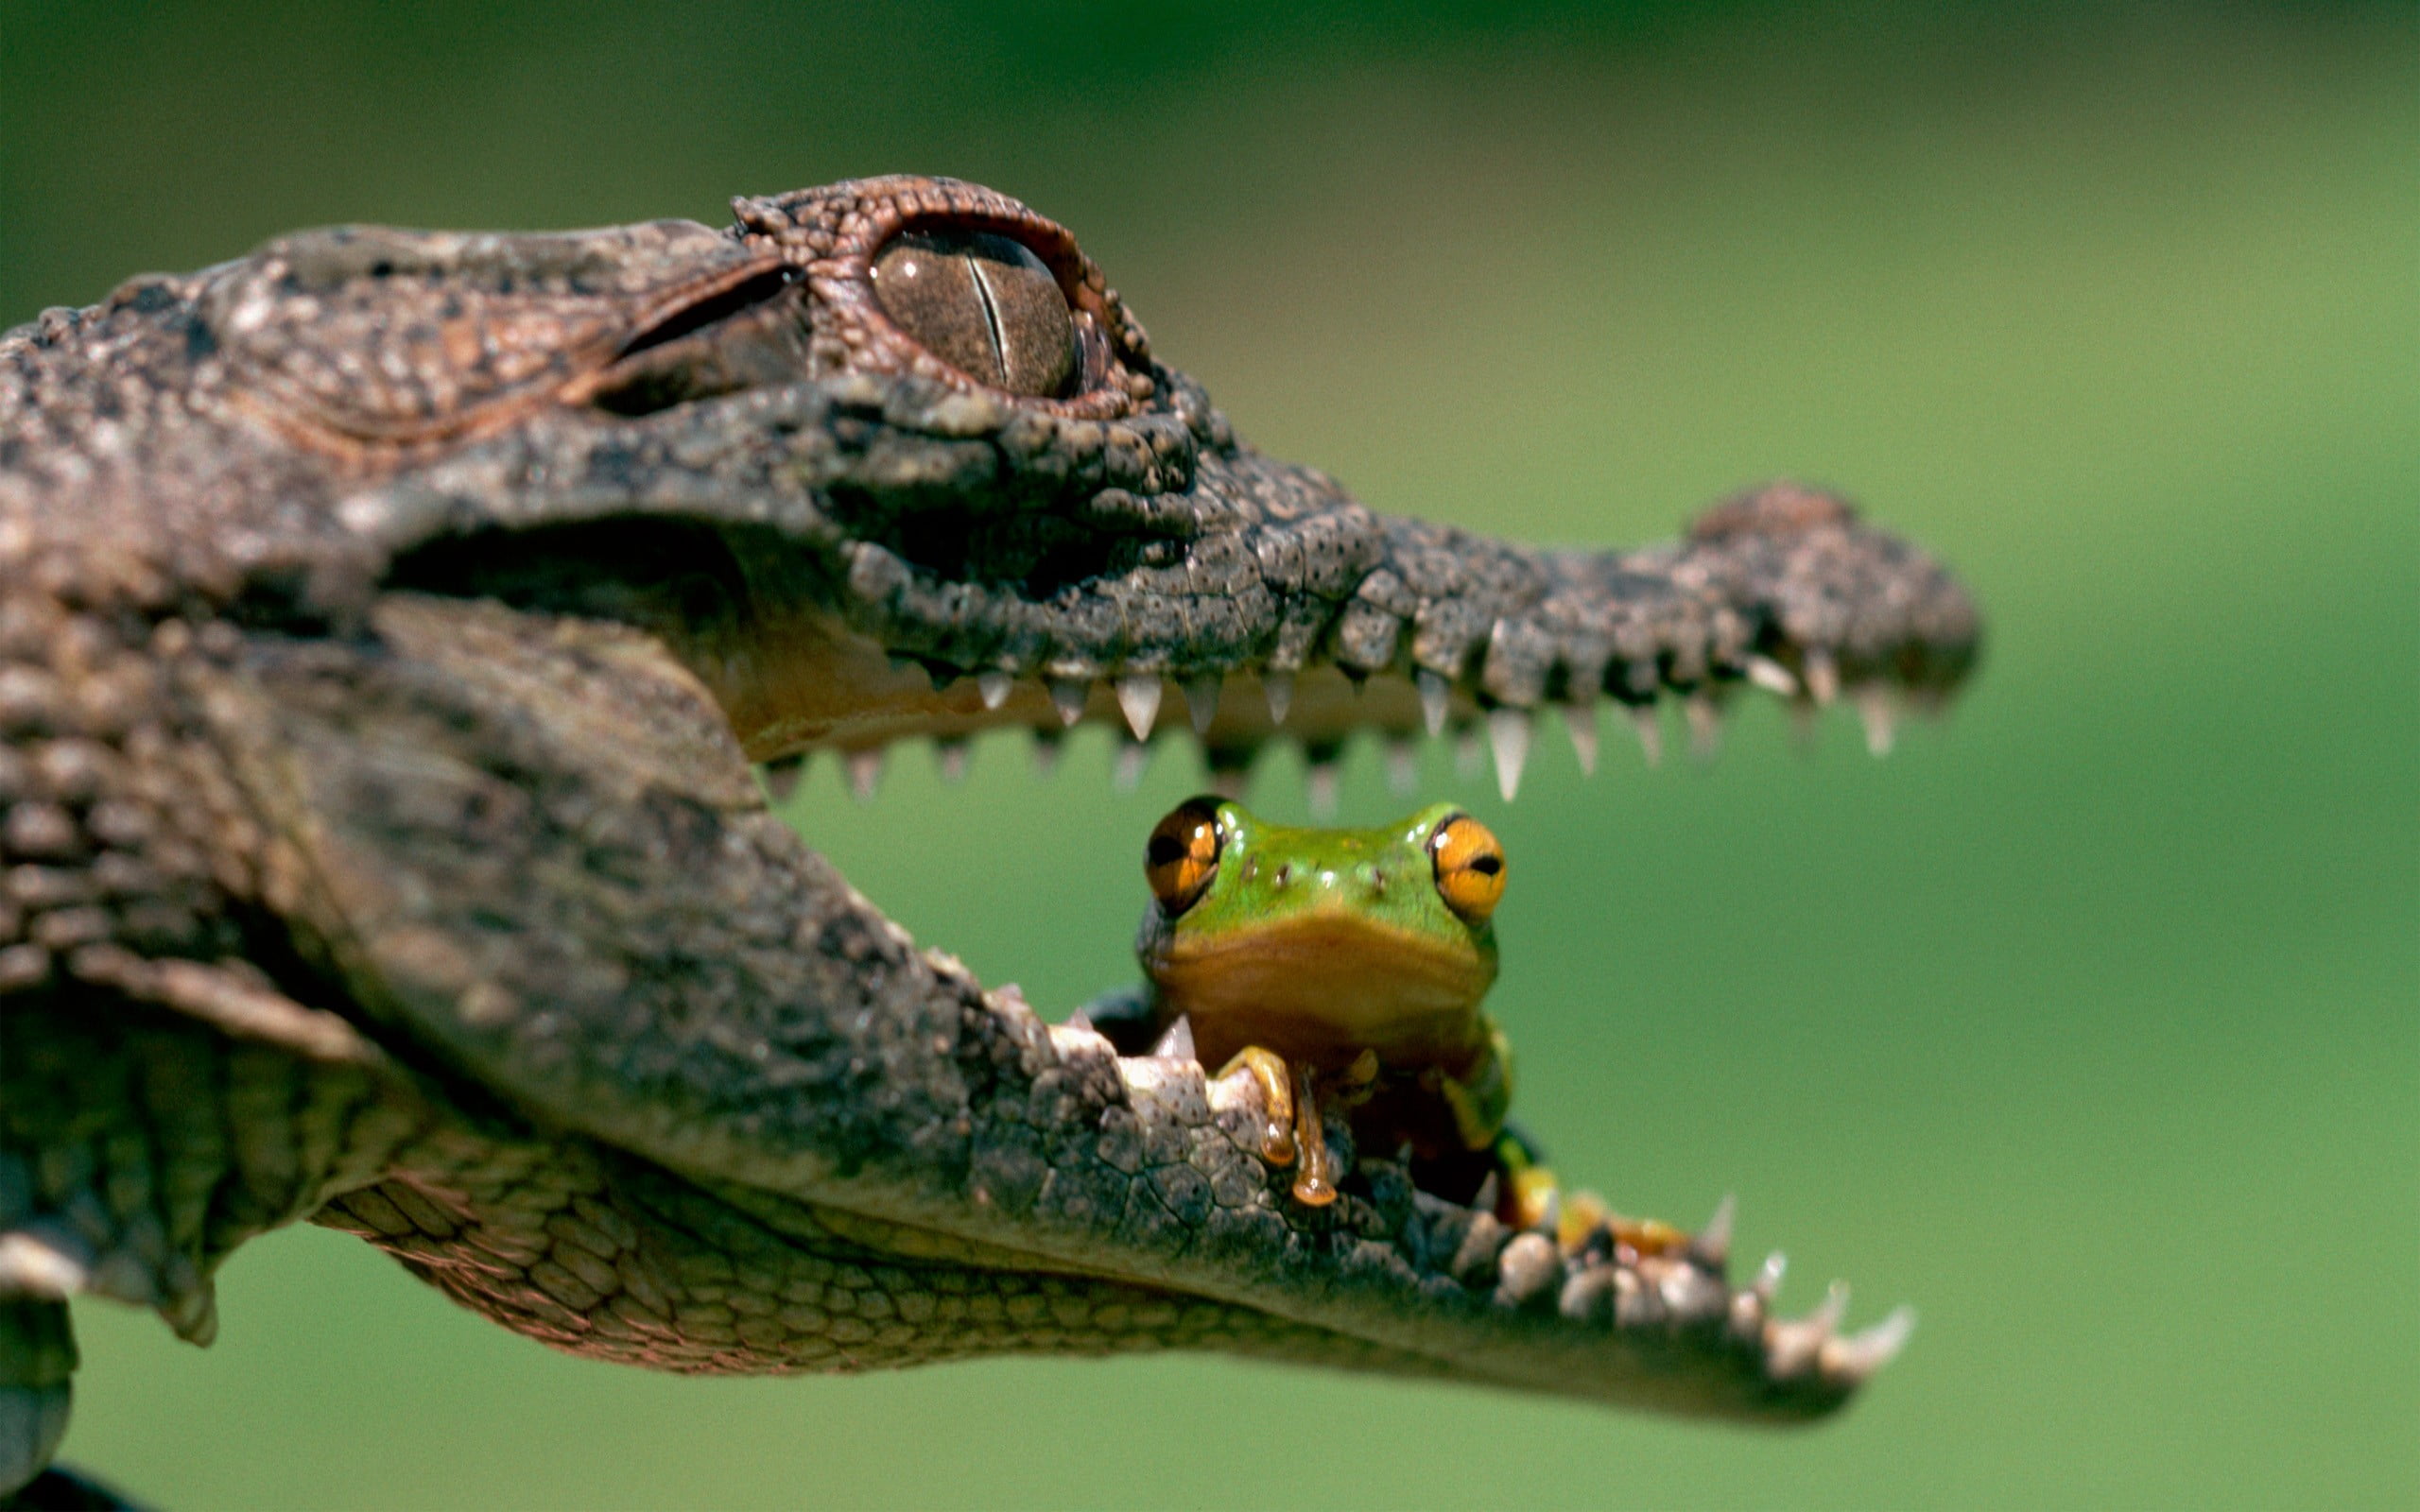 alligator and frog, green tree frog sitting on alligator's mouth